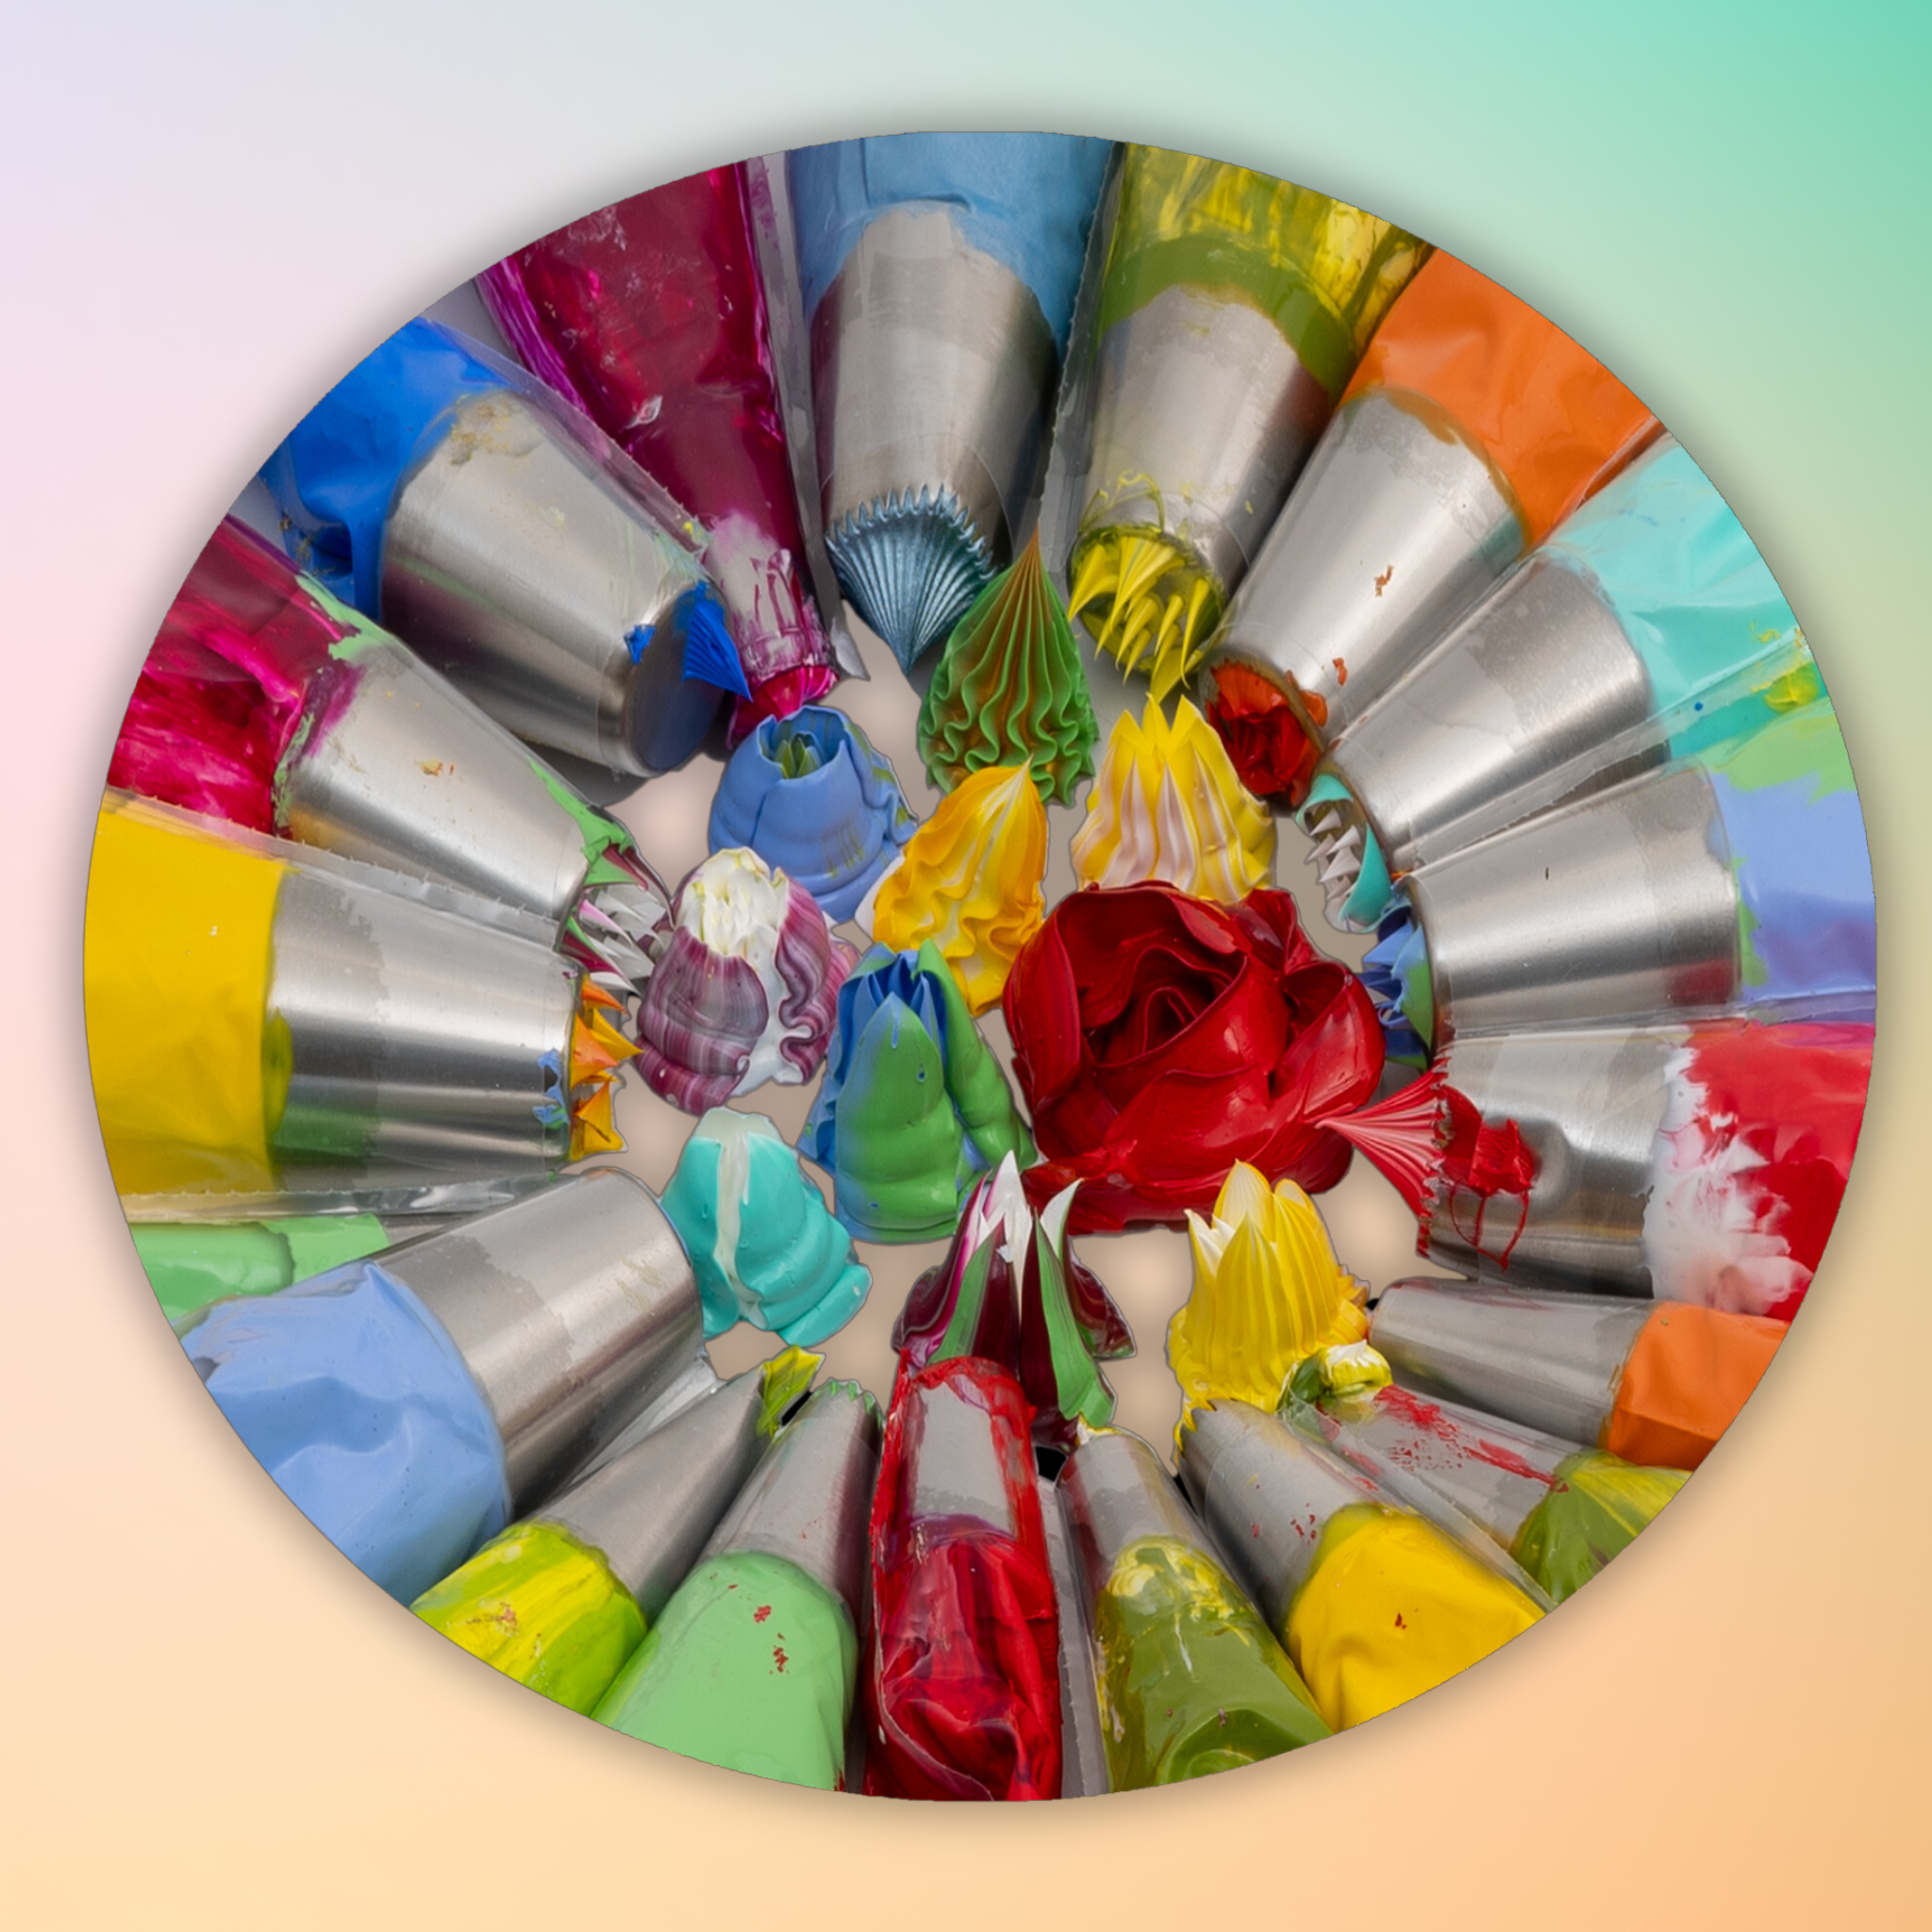 A circular arrangement of paint piping tools with squeezed out colorful acrylic paint.